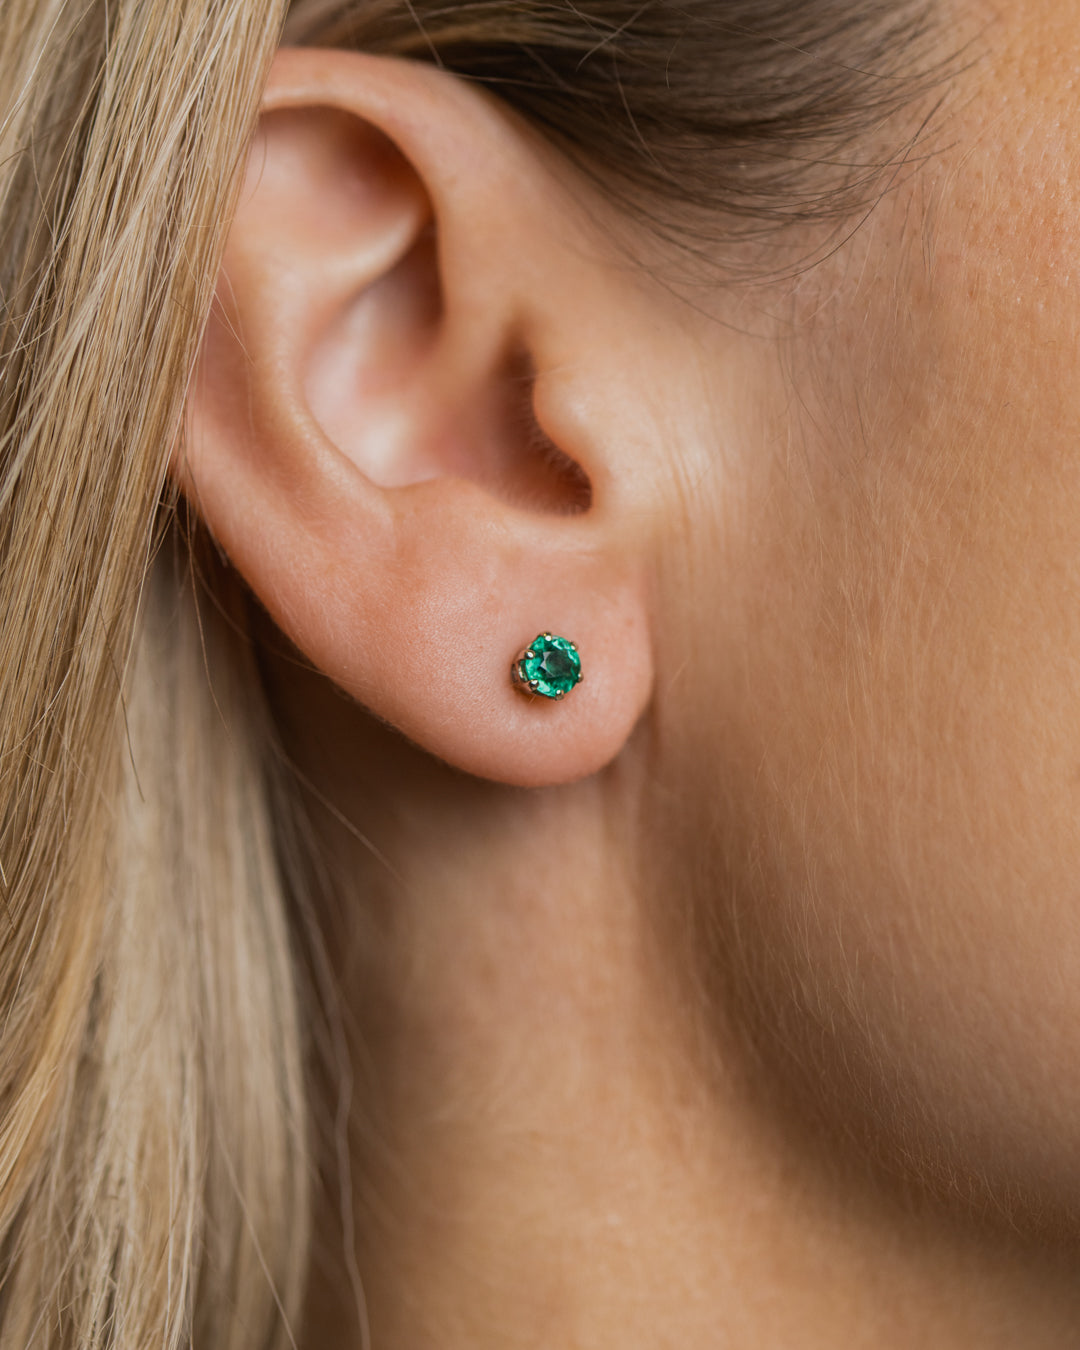 JR Solitaire Collection - Earrings Emerald x Whitegold